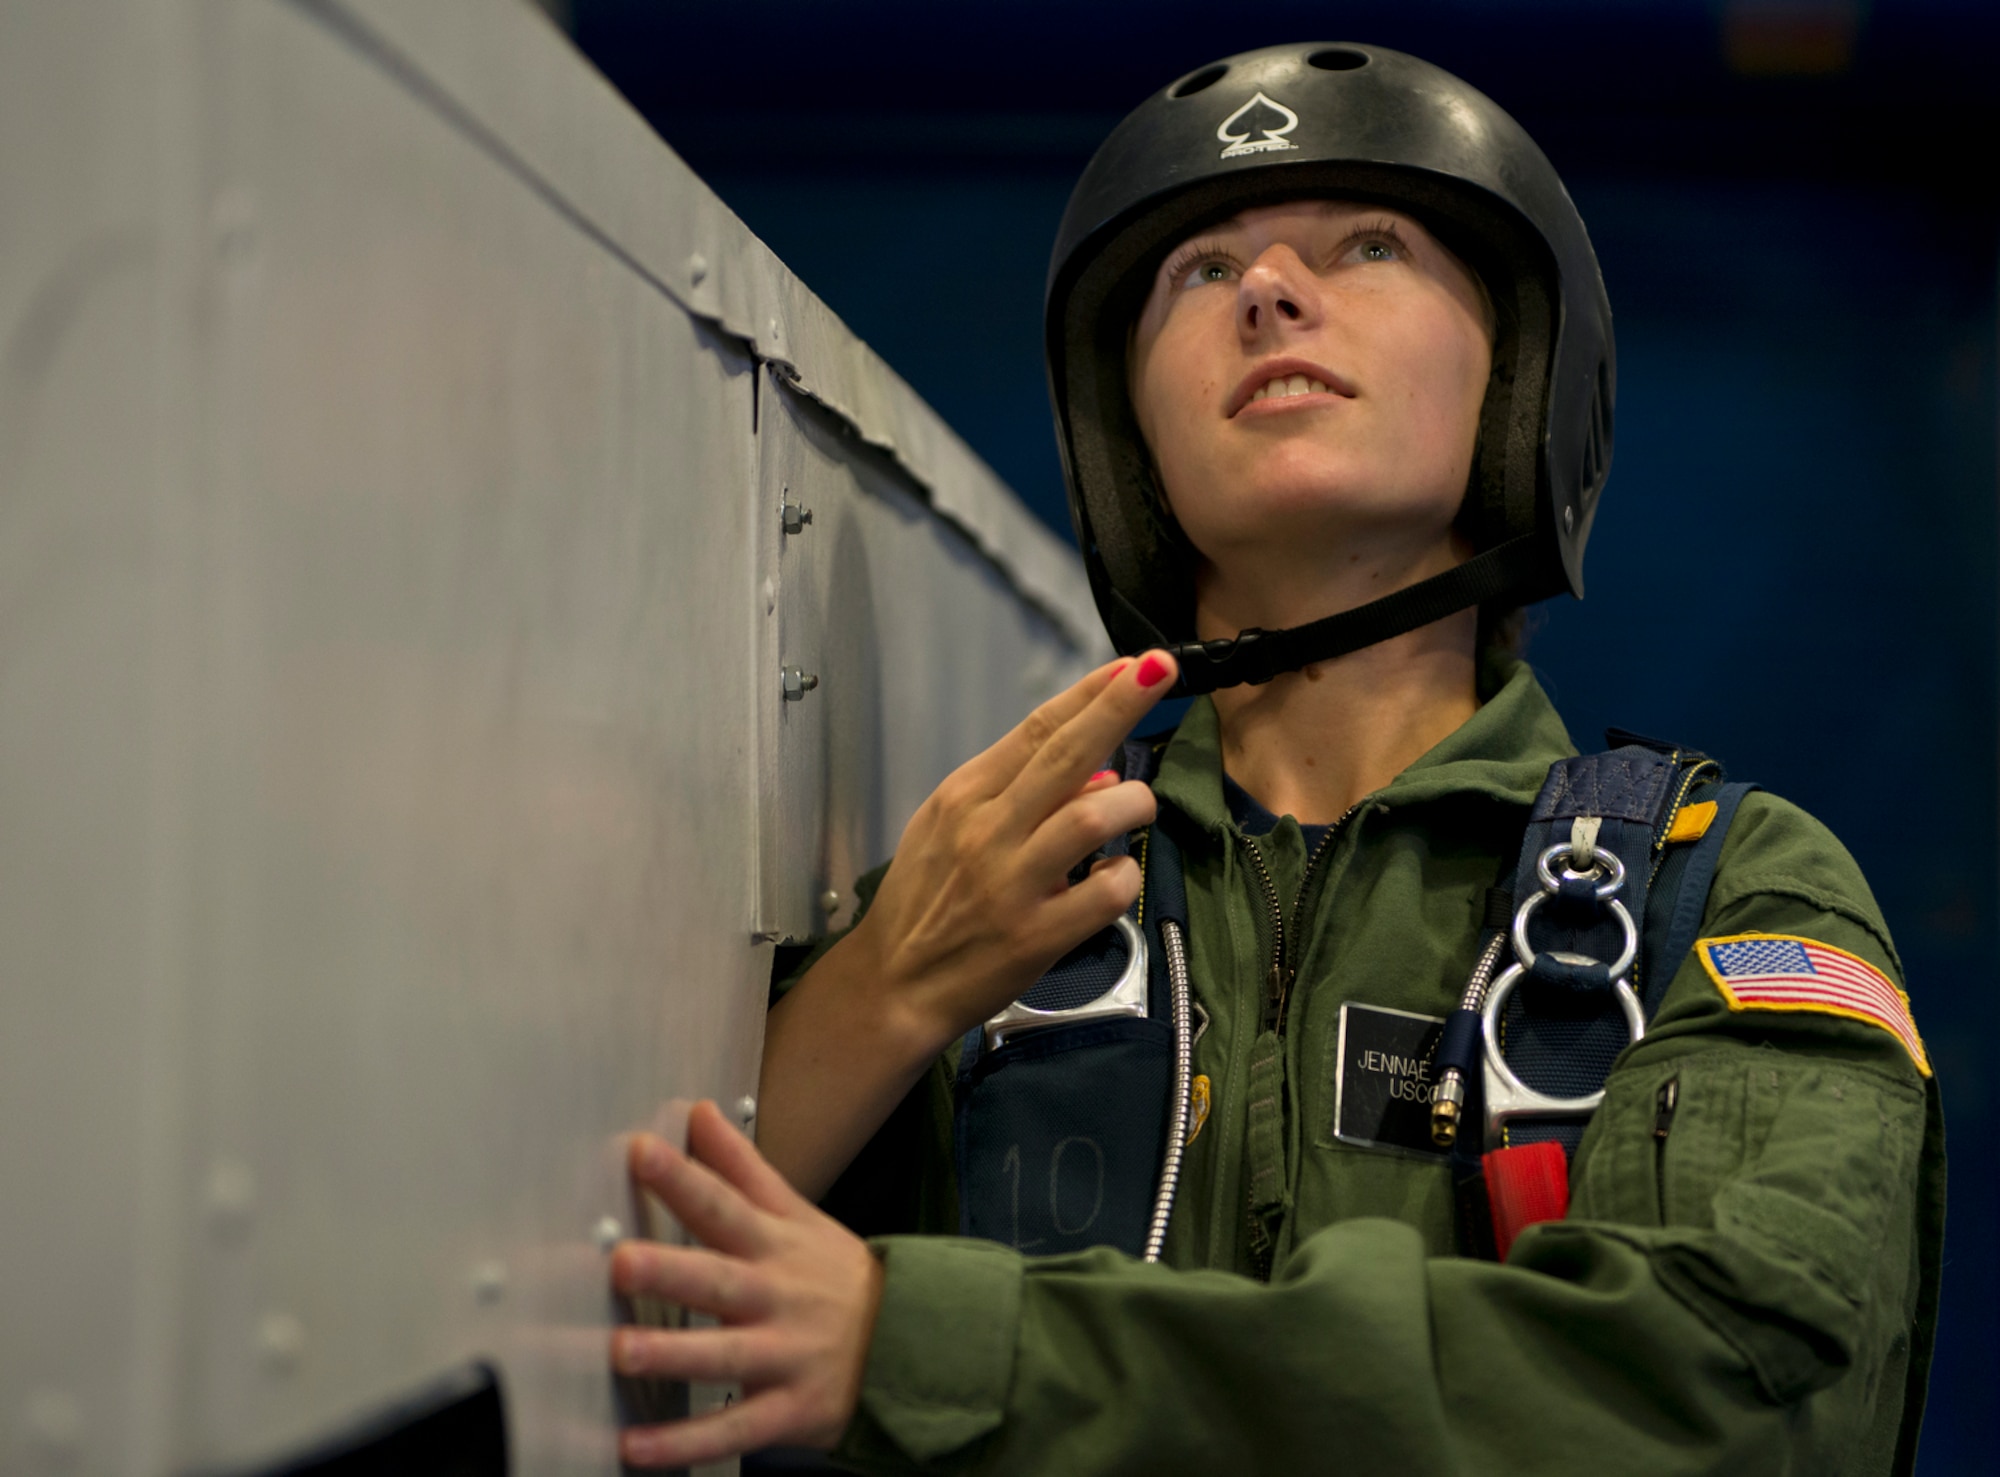 U.S. Air Force Academy Cadet Jennae Stienmiller of the U.S. Coast Guard, receives the "go" signal from her jump master as she stands in the door of a mock aircraft preparing to simulate a parachute free-fall jump. (U.S. Air Force photo/Tech. Sgt. Bennie J. Davis III)